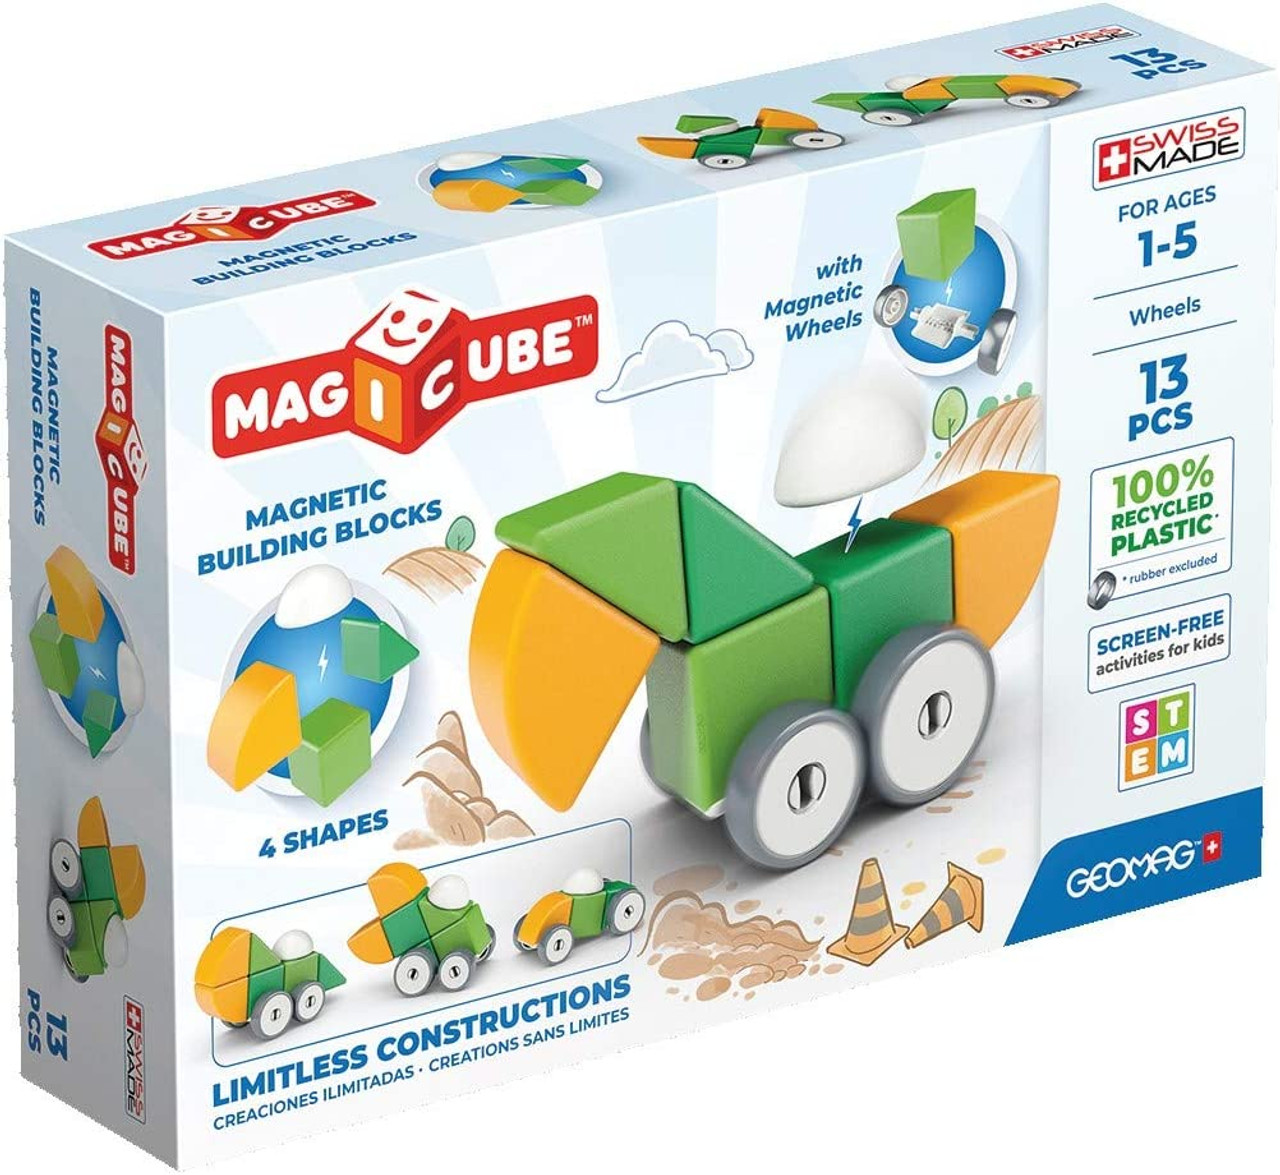 Geomag GLOW Color Recycled 60 pcs - Geomagworld STEM Toys